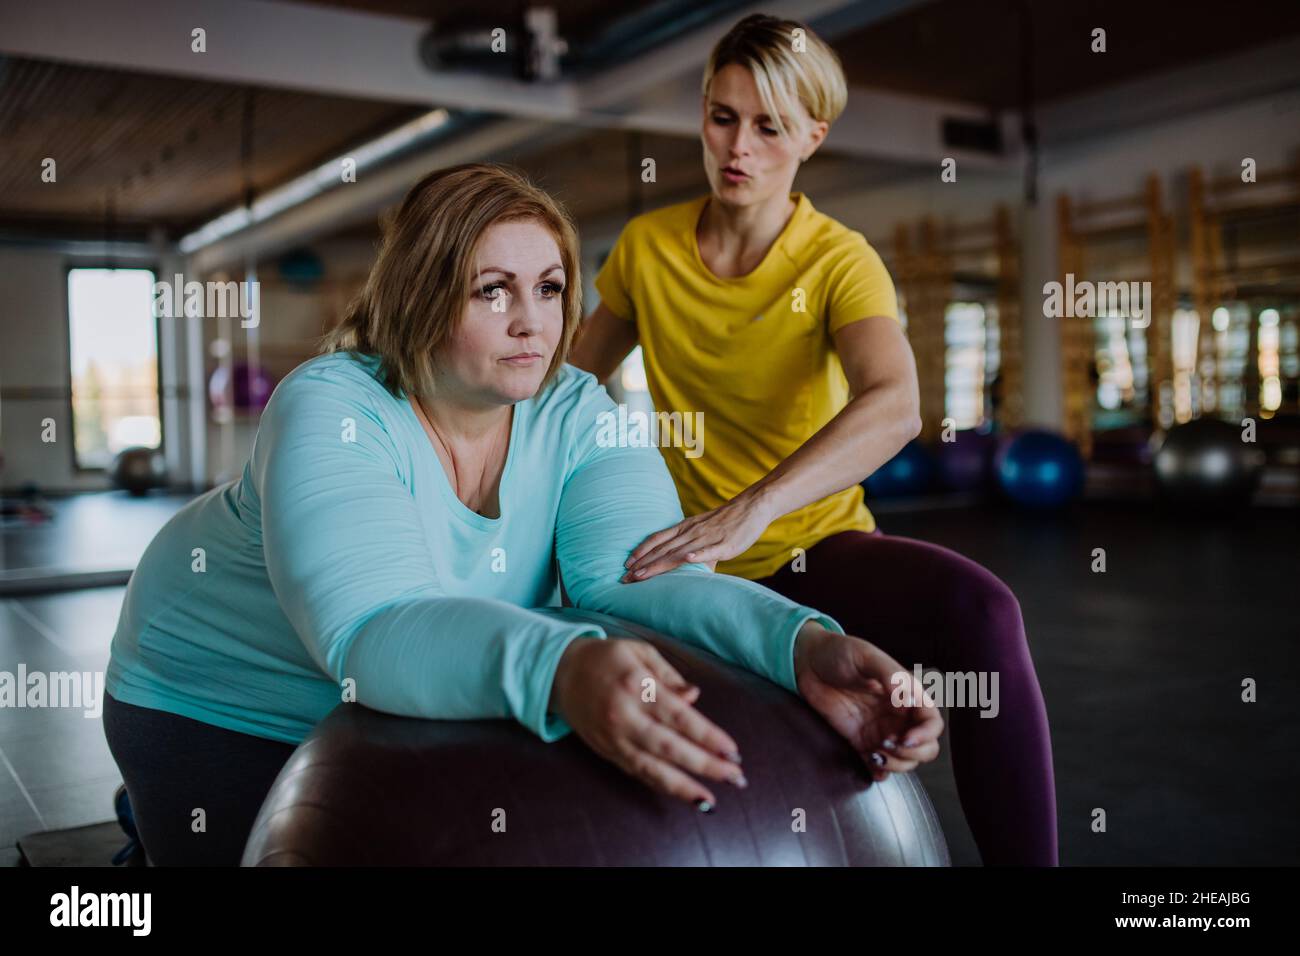 Happy overweight woman exercising with personal trainer on fintess ball in gym Stock Photo